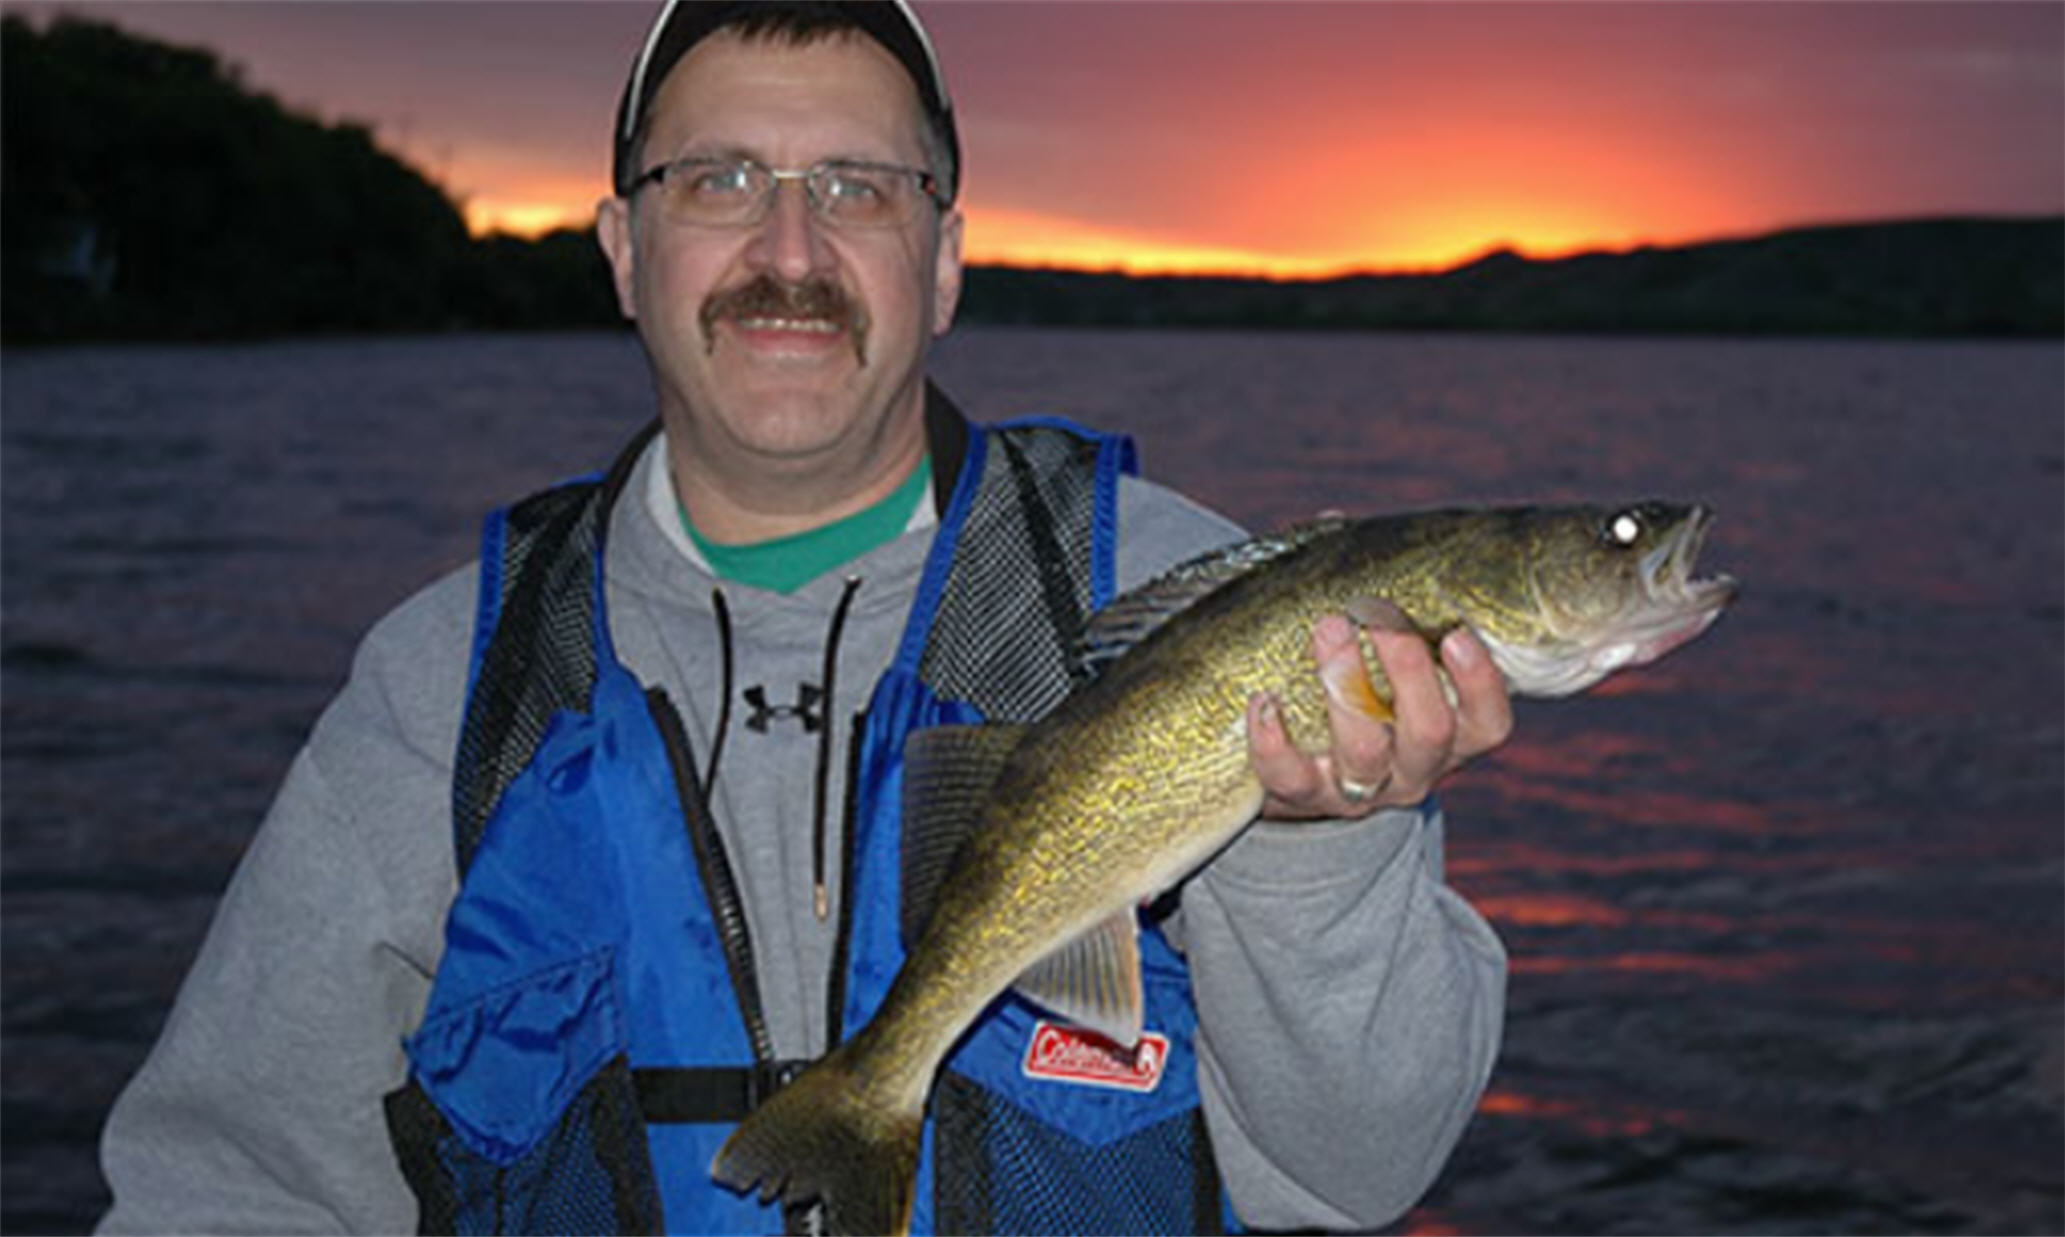 Fishing With Slip Bobbers for Walleye